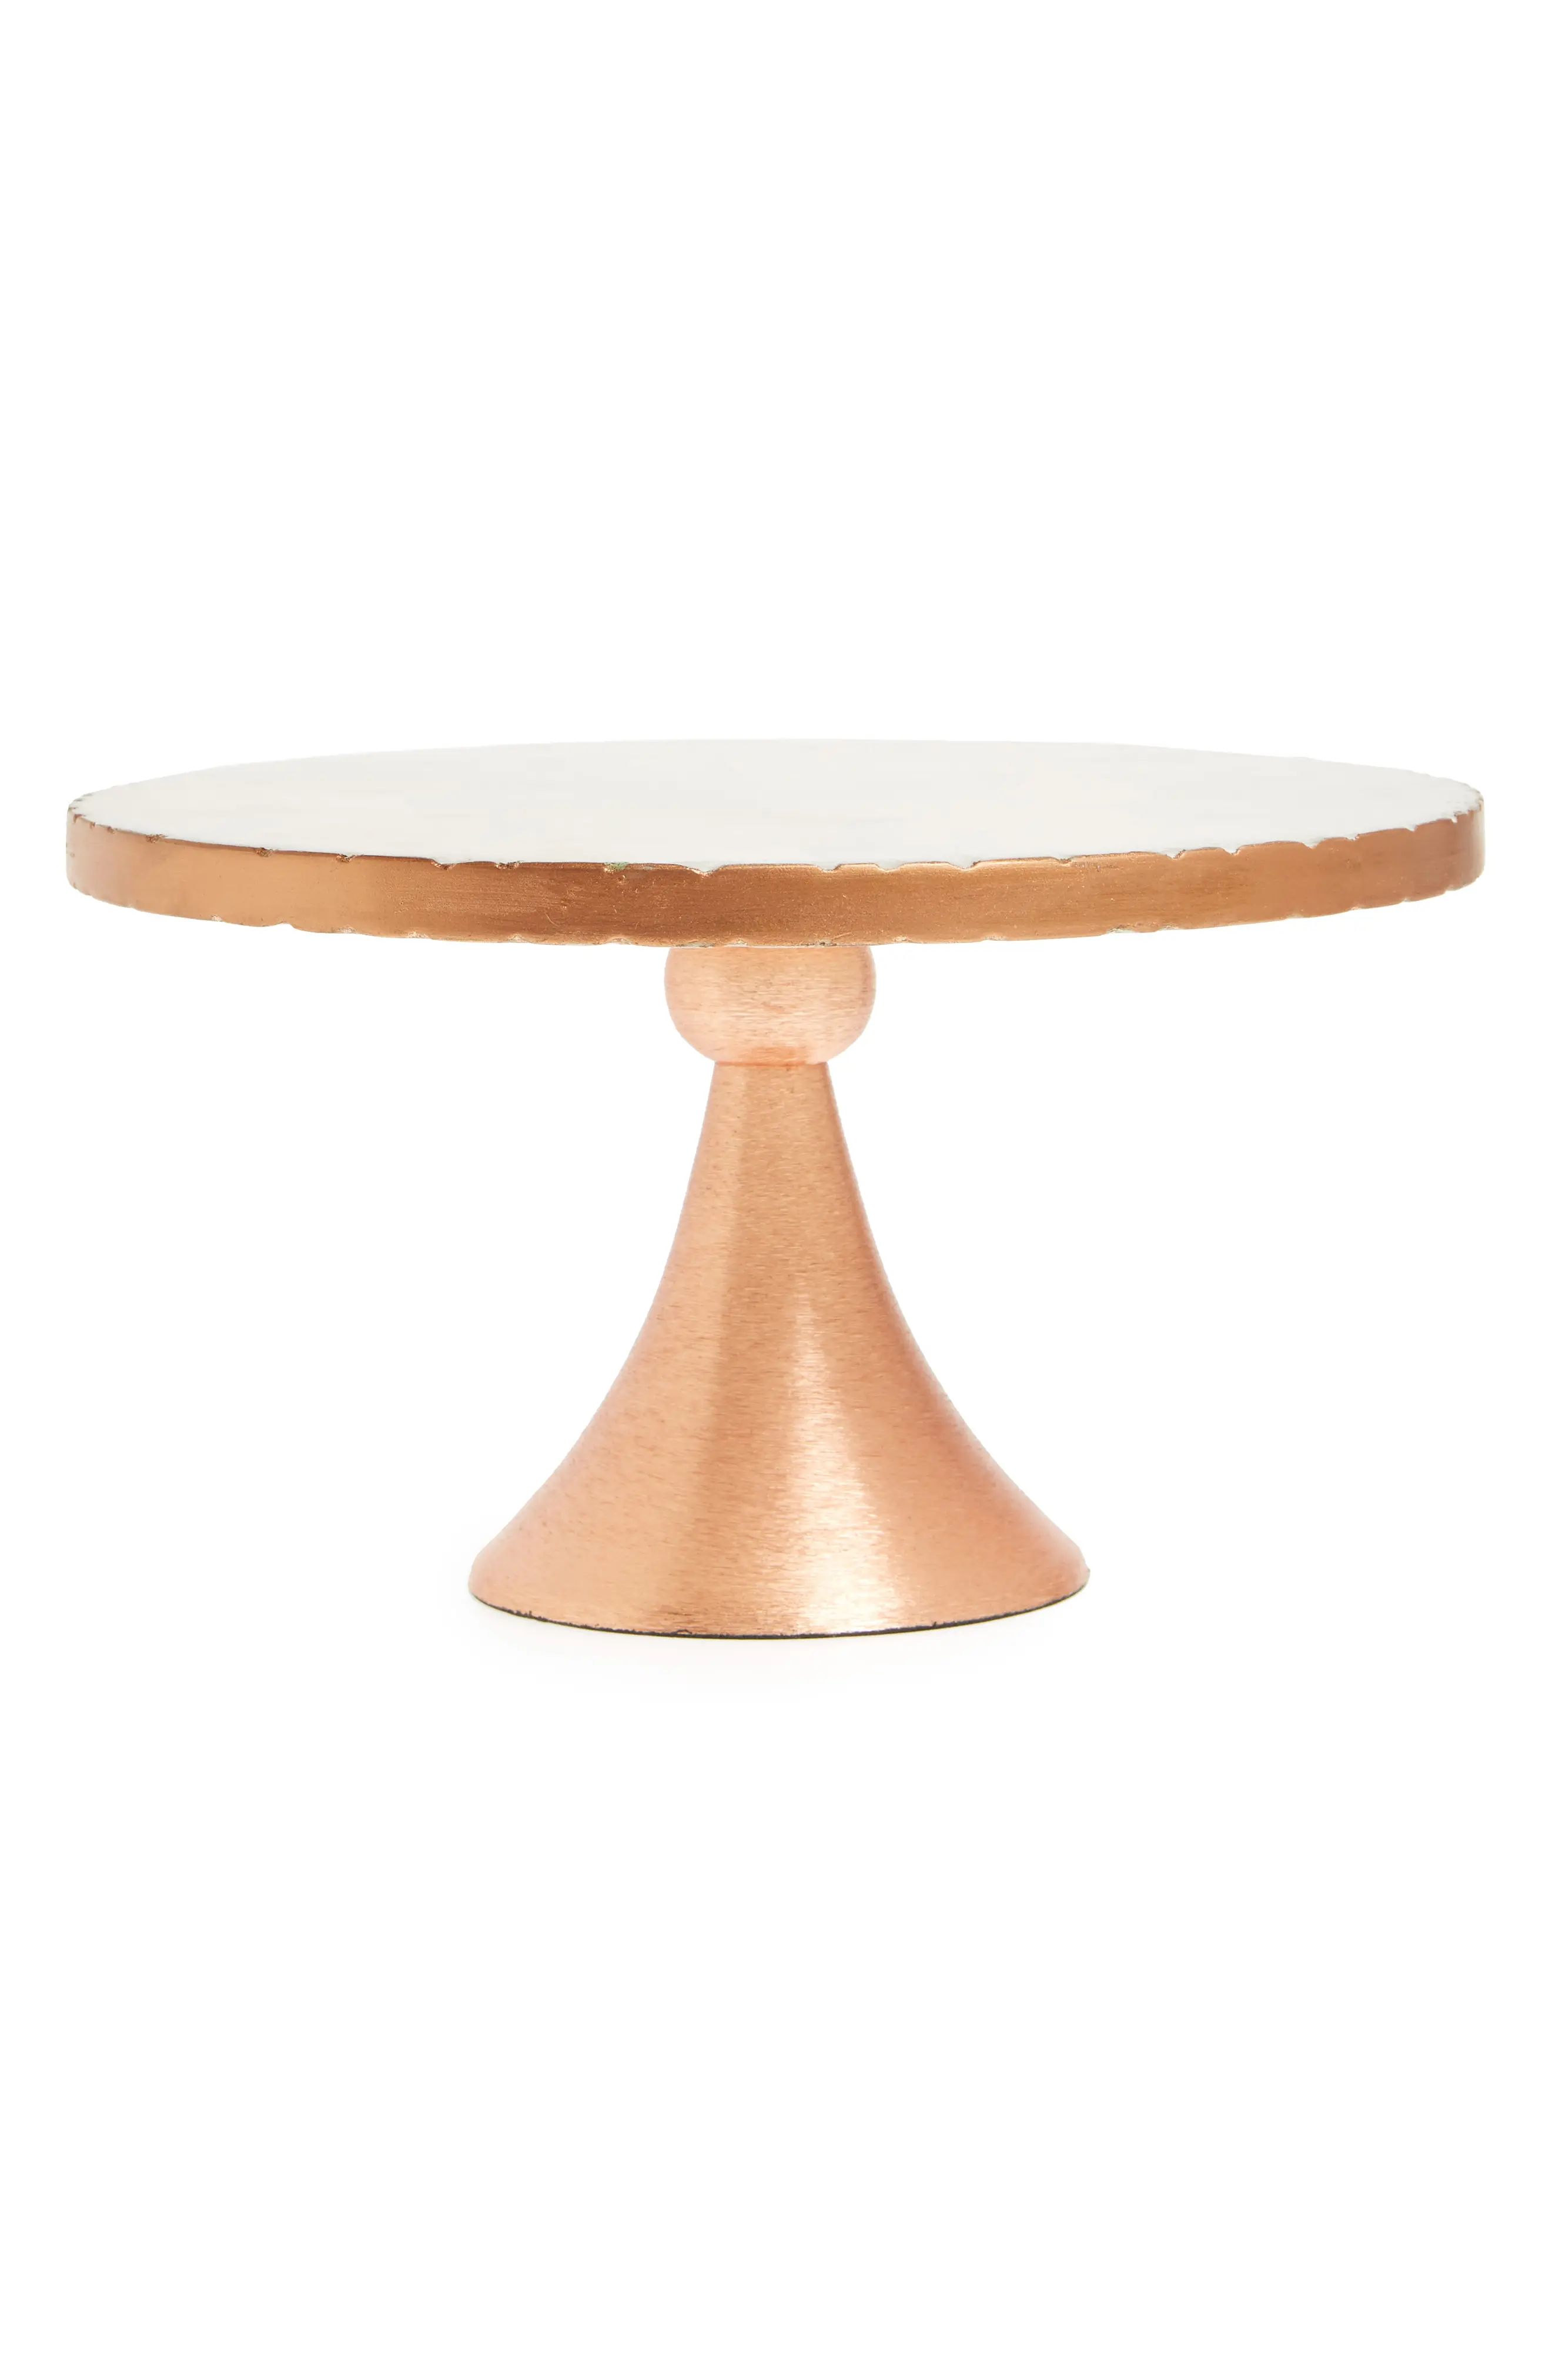 Marble & Copper Cake Stand | Nordstrom